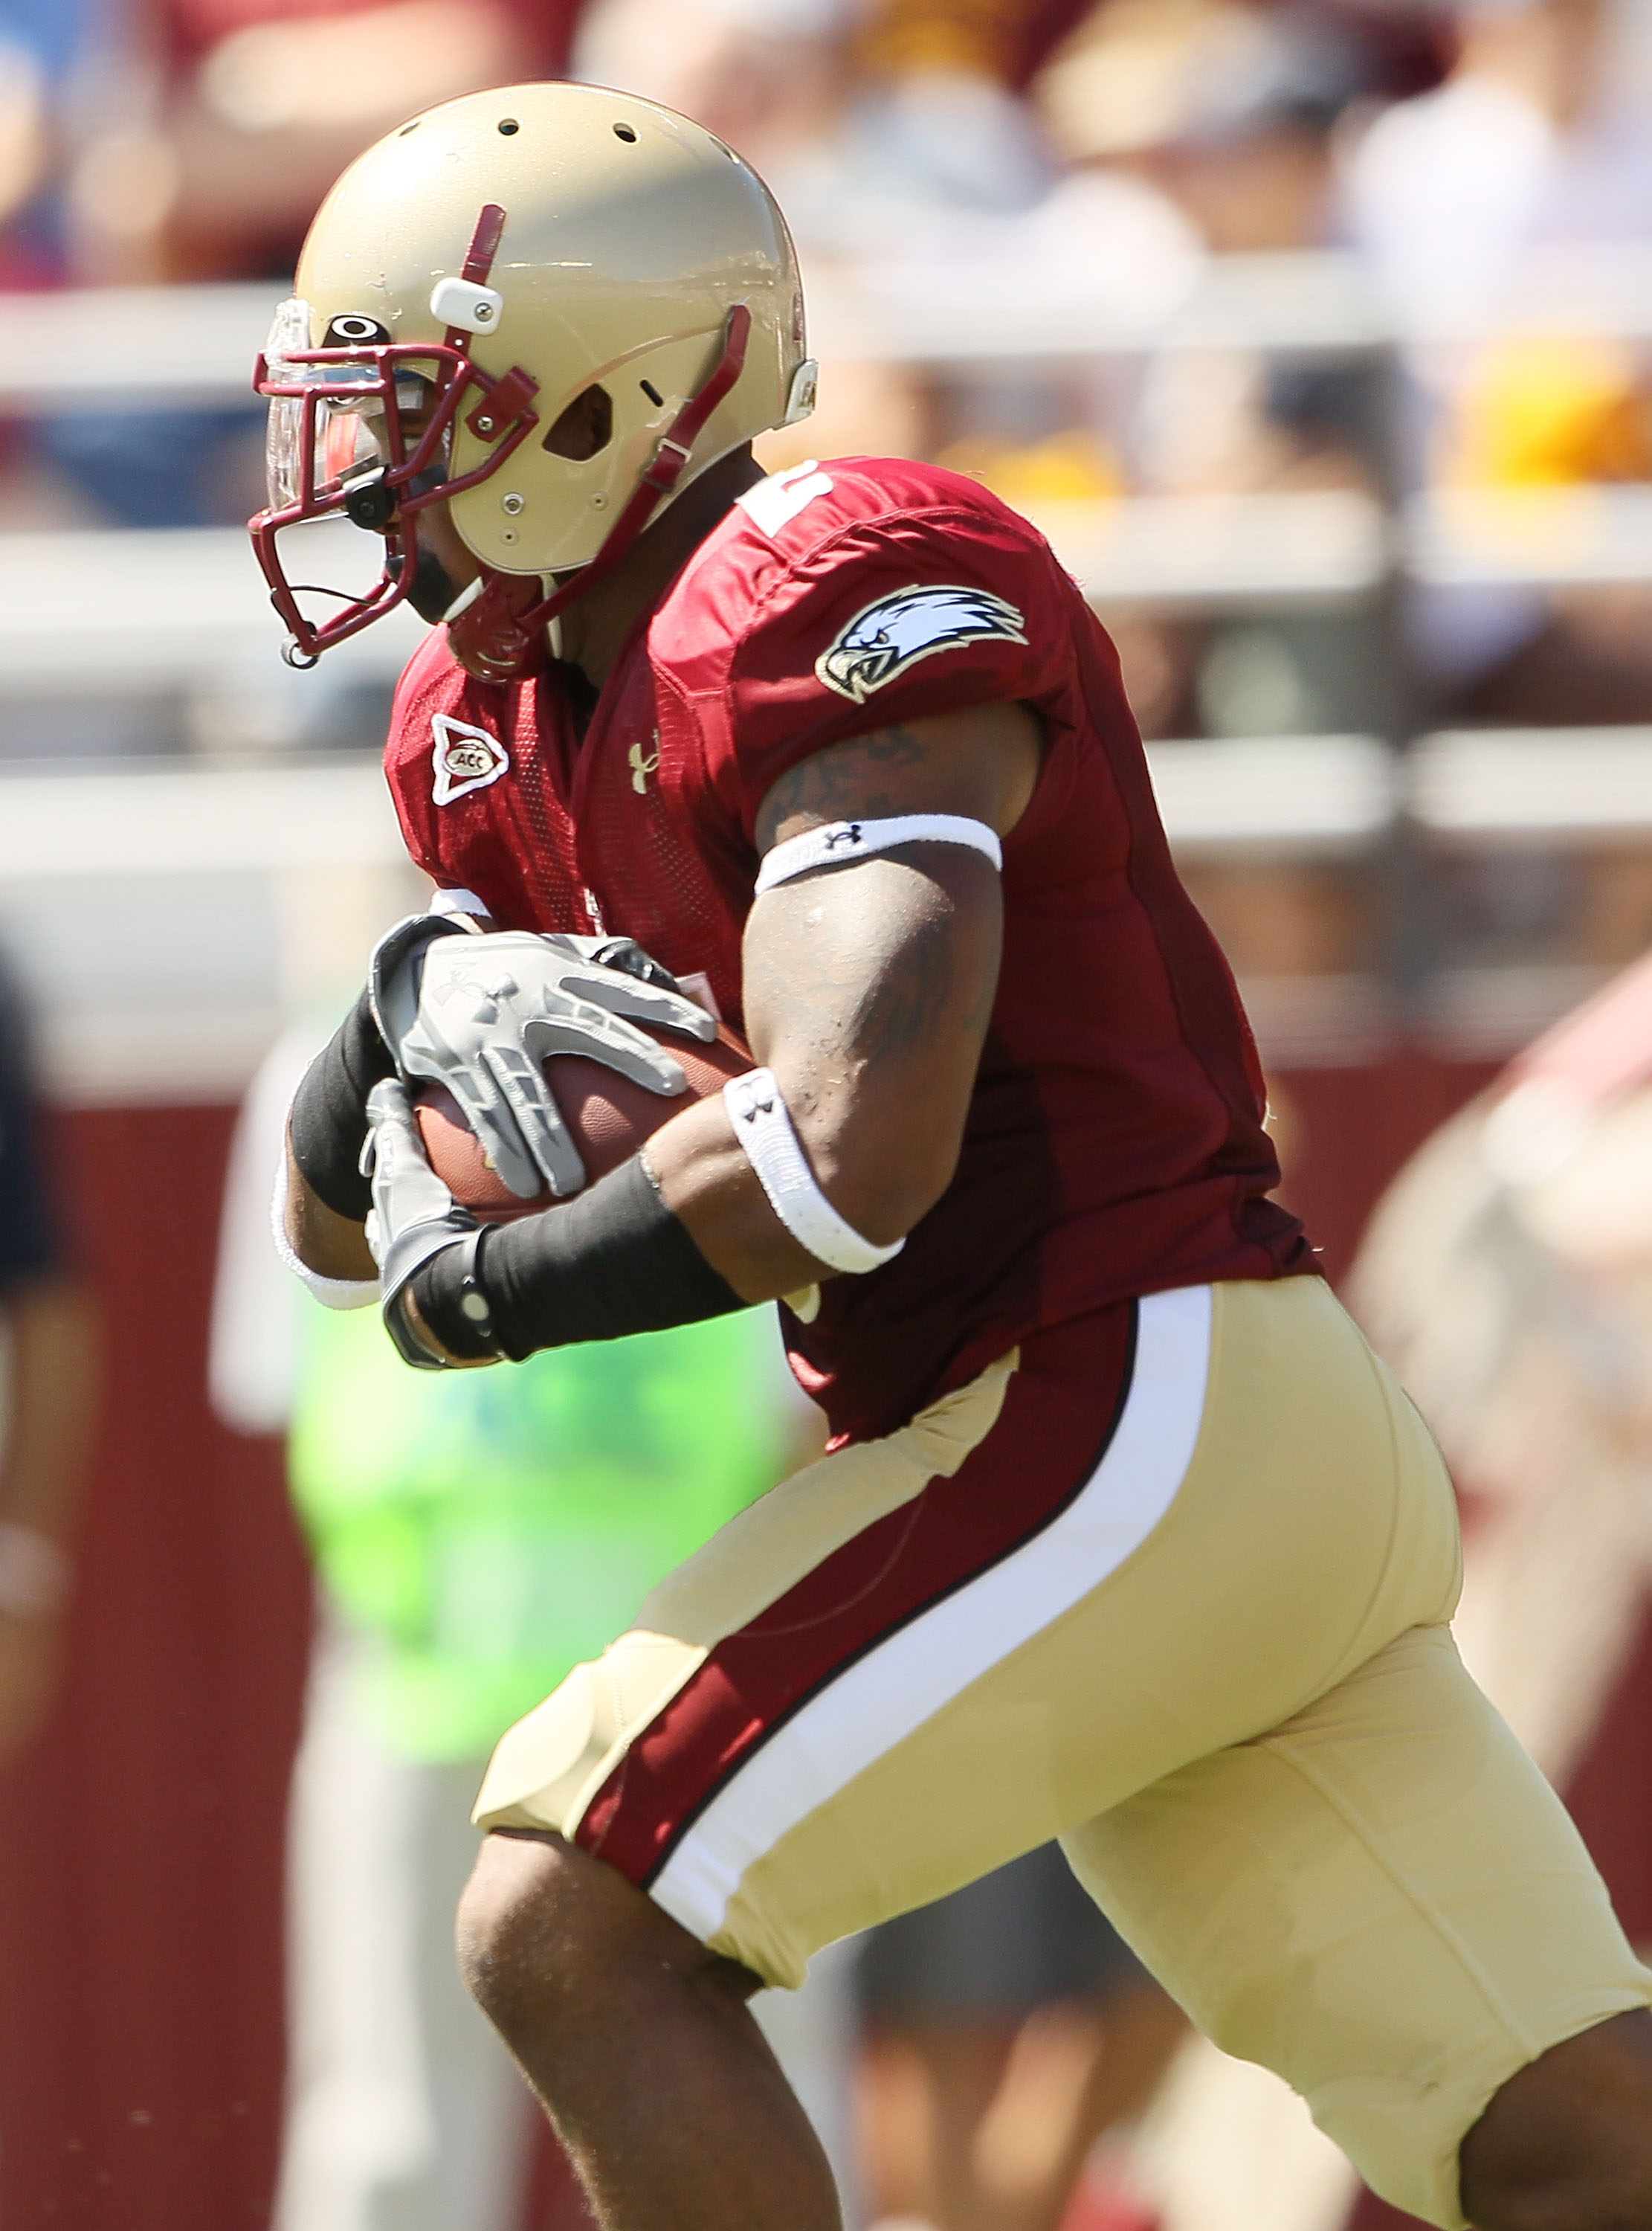 CHESTNUT HILL, MA - SEPTEMBER 04:  Montel Harris #2 of the Boston College Eagles carries the ball in the first quarter against the Weber State Wildcats on September 4, 2010 at Alumni Stadium in Chestnut Hill, Massachusetts.  (Photo by Elsa/Getty Images)